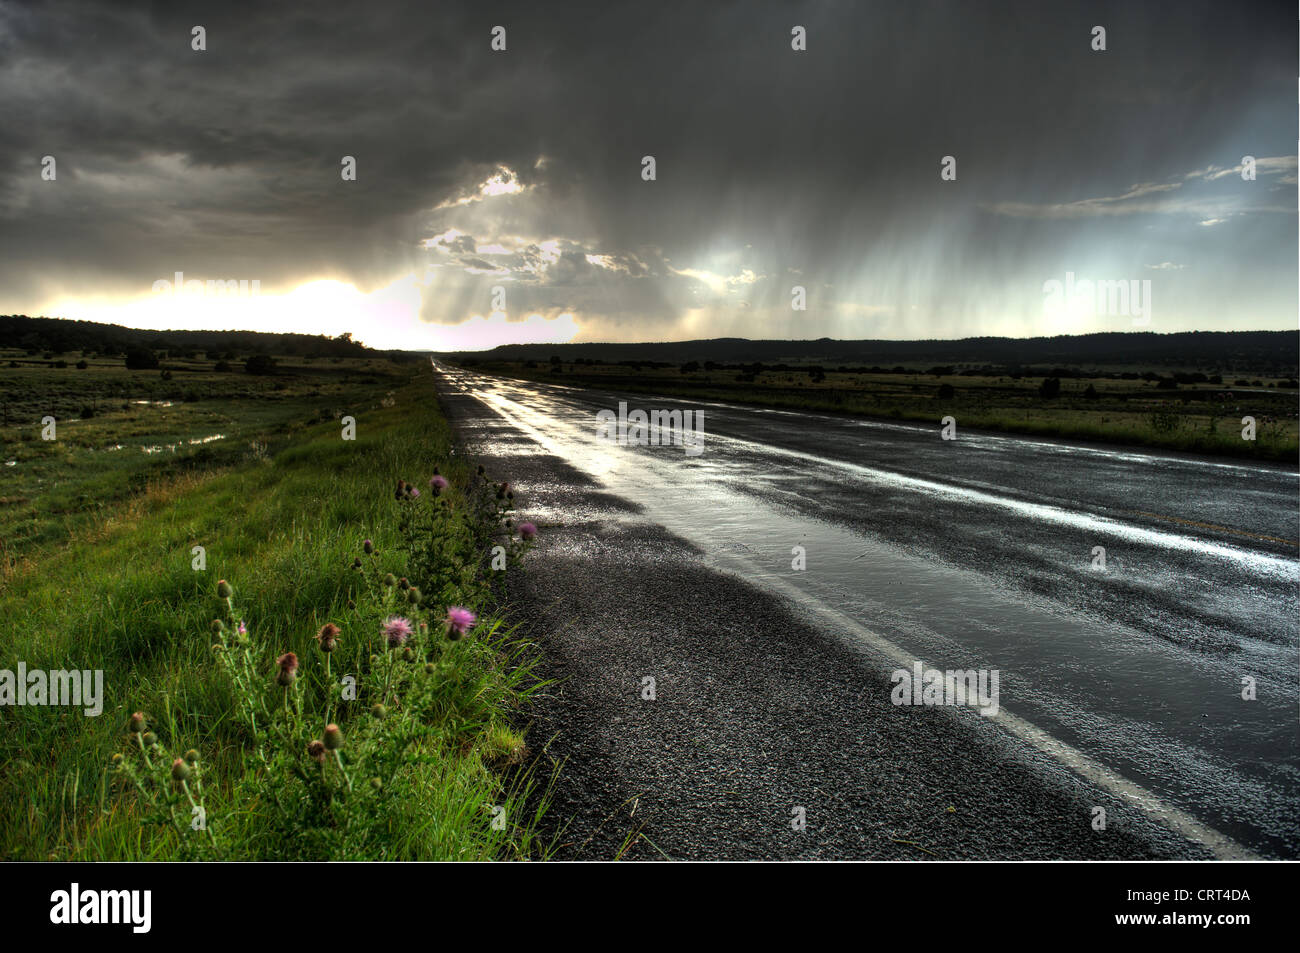 A summer thunderstorm left the roads wet in Roy, New Mexico Stock Photo